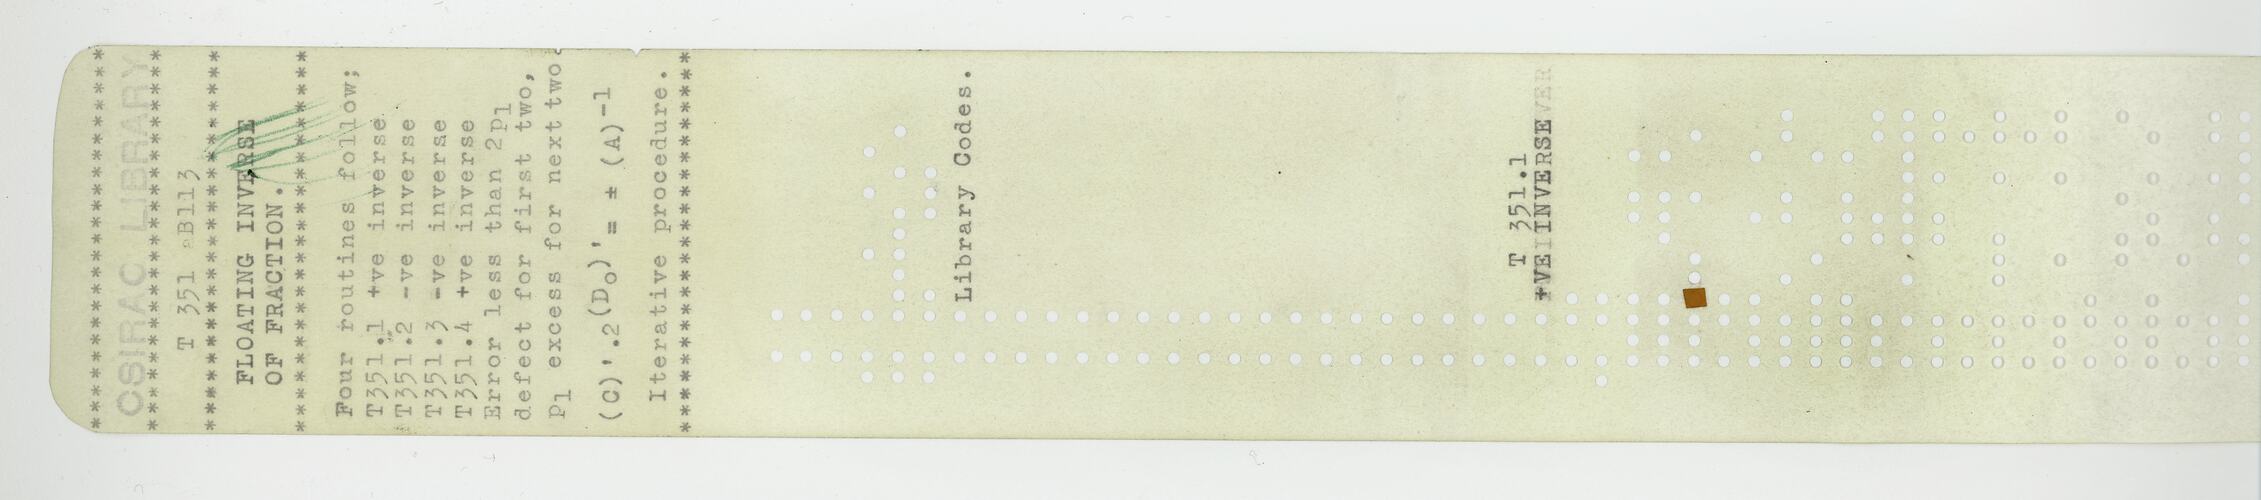 Paper tape with typed text and punched holes.